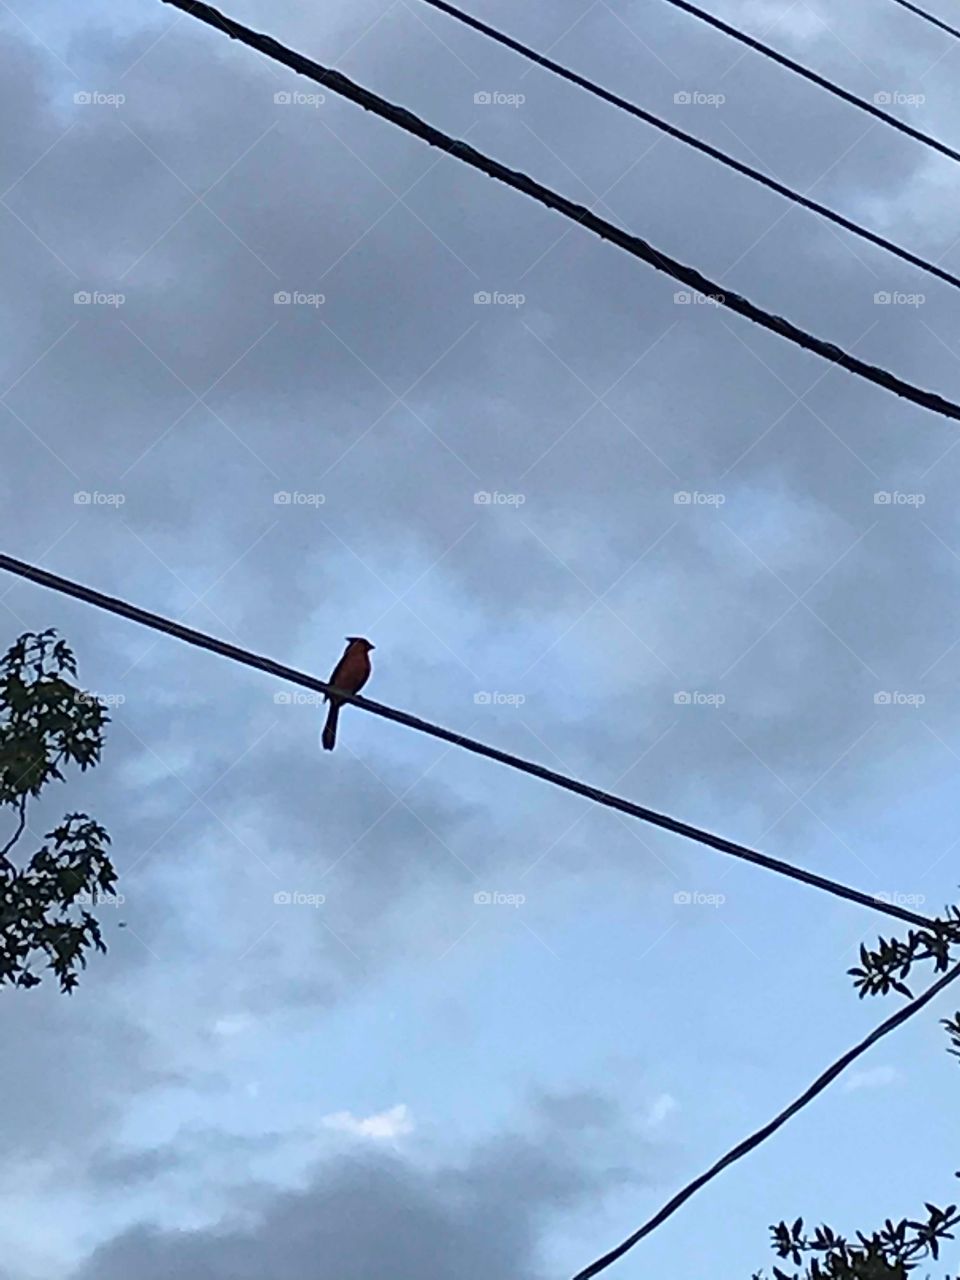 Cardinal Red Bird in a Wire Against Cloudy Sky